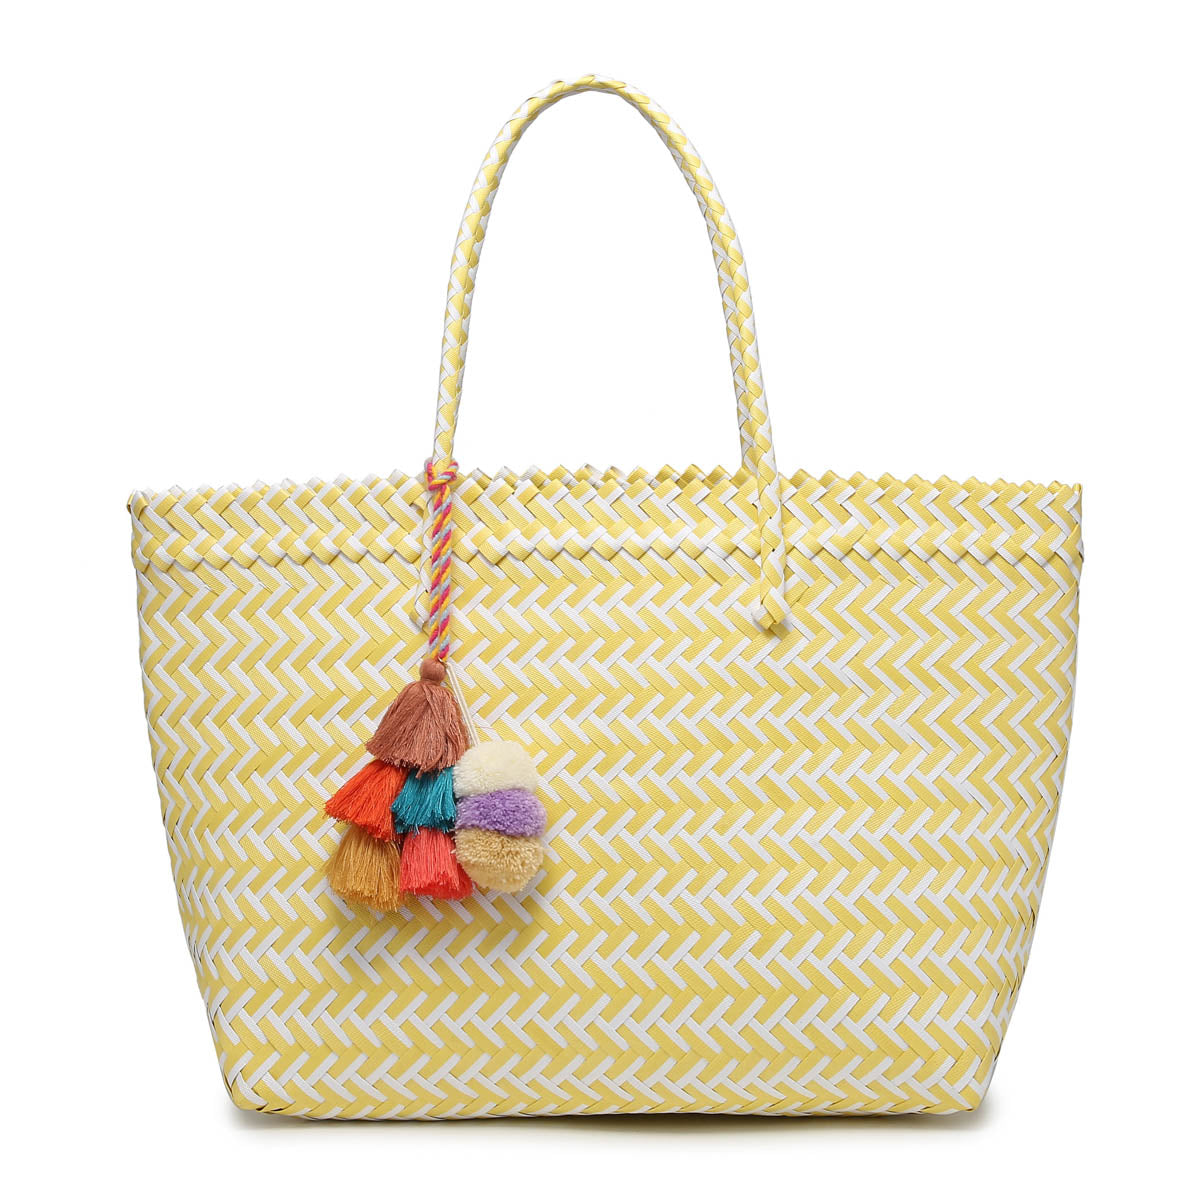 Jen & Co - Shelby Large Handwoven Tote with Pom-Poms